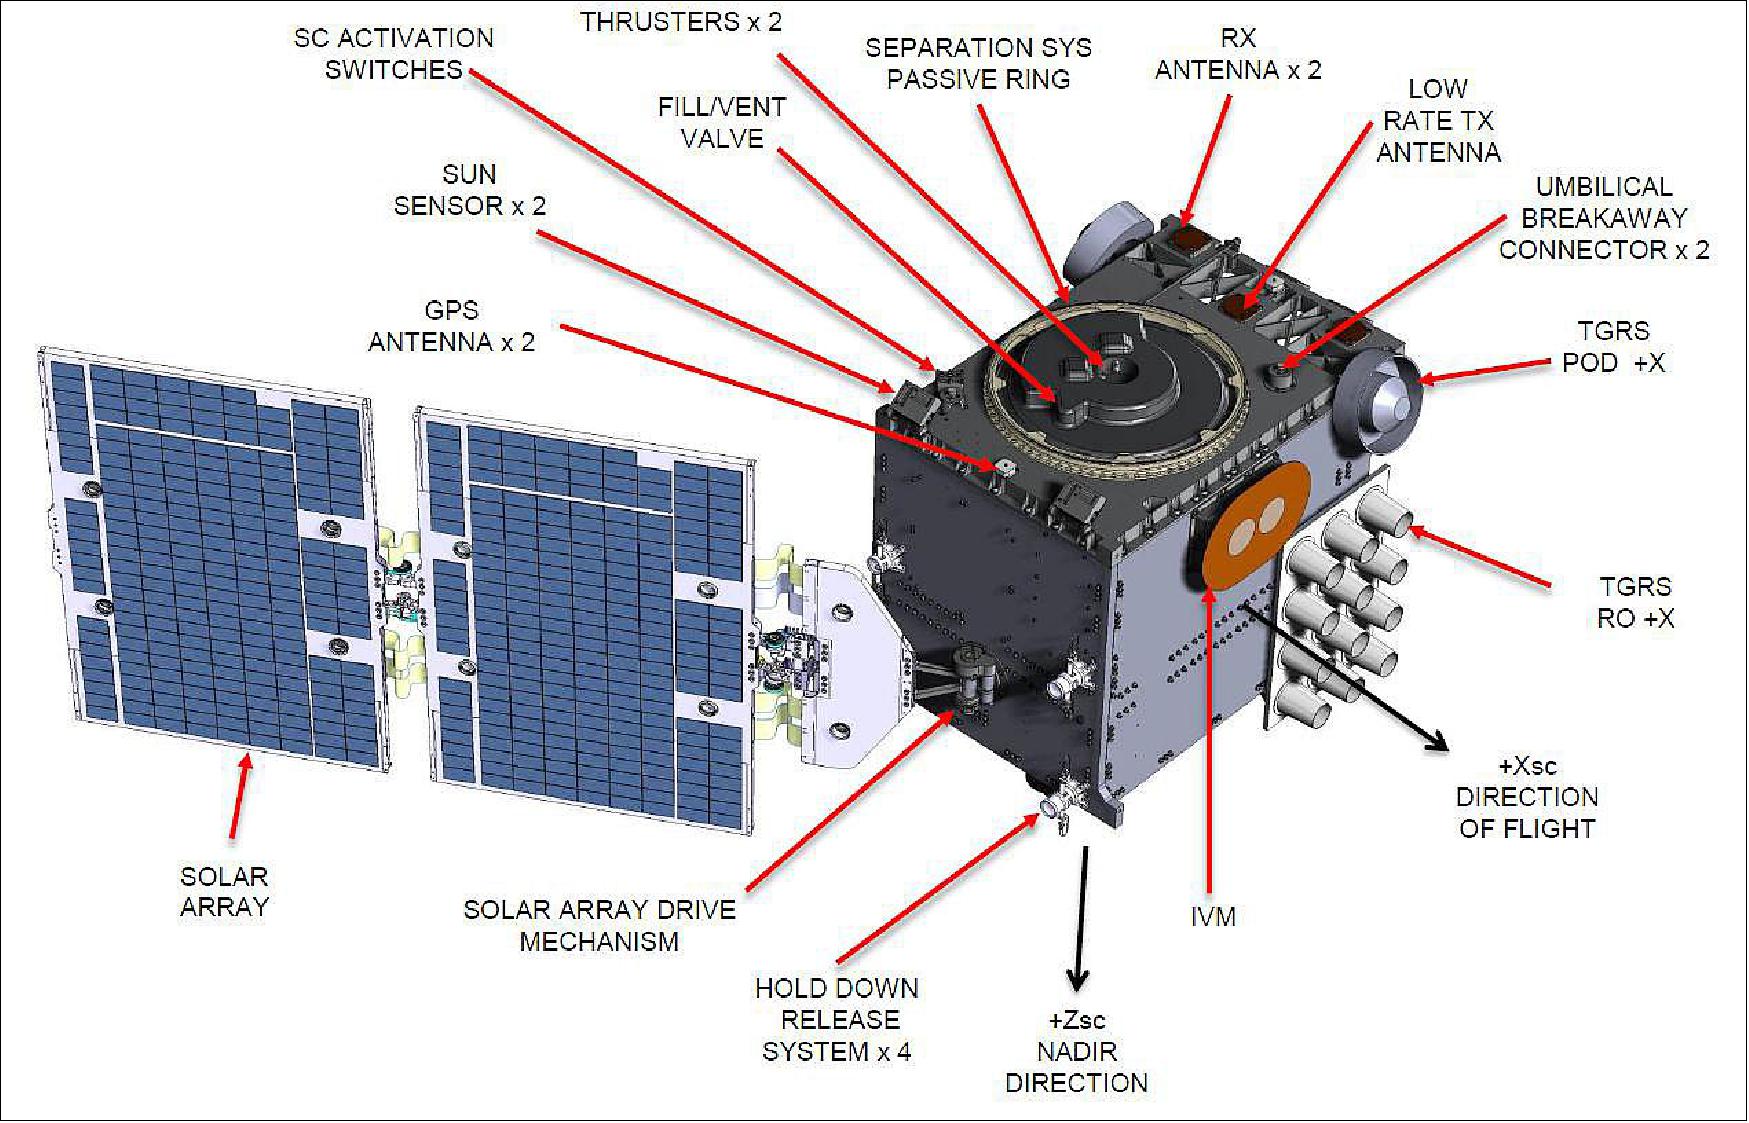 Figure 6: Spacecraft external layout viewed from the +x direction (image credit: SSTL, NARLabs)